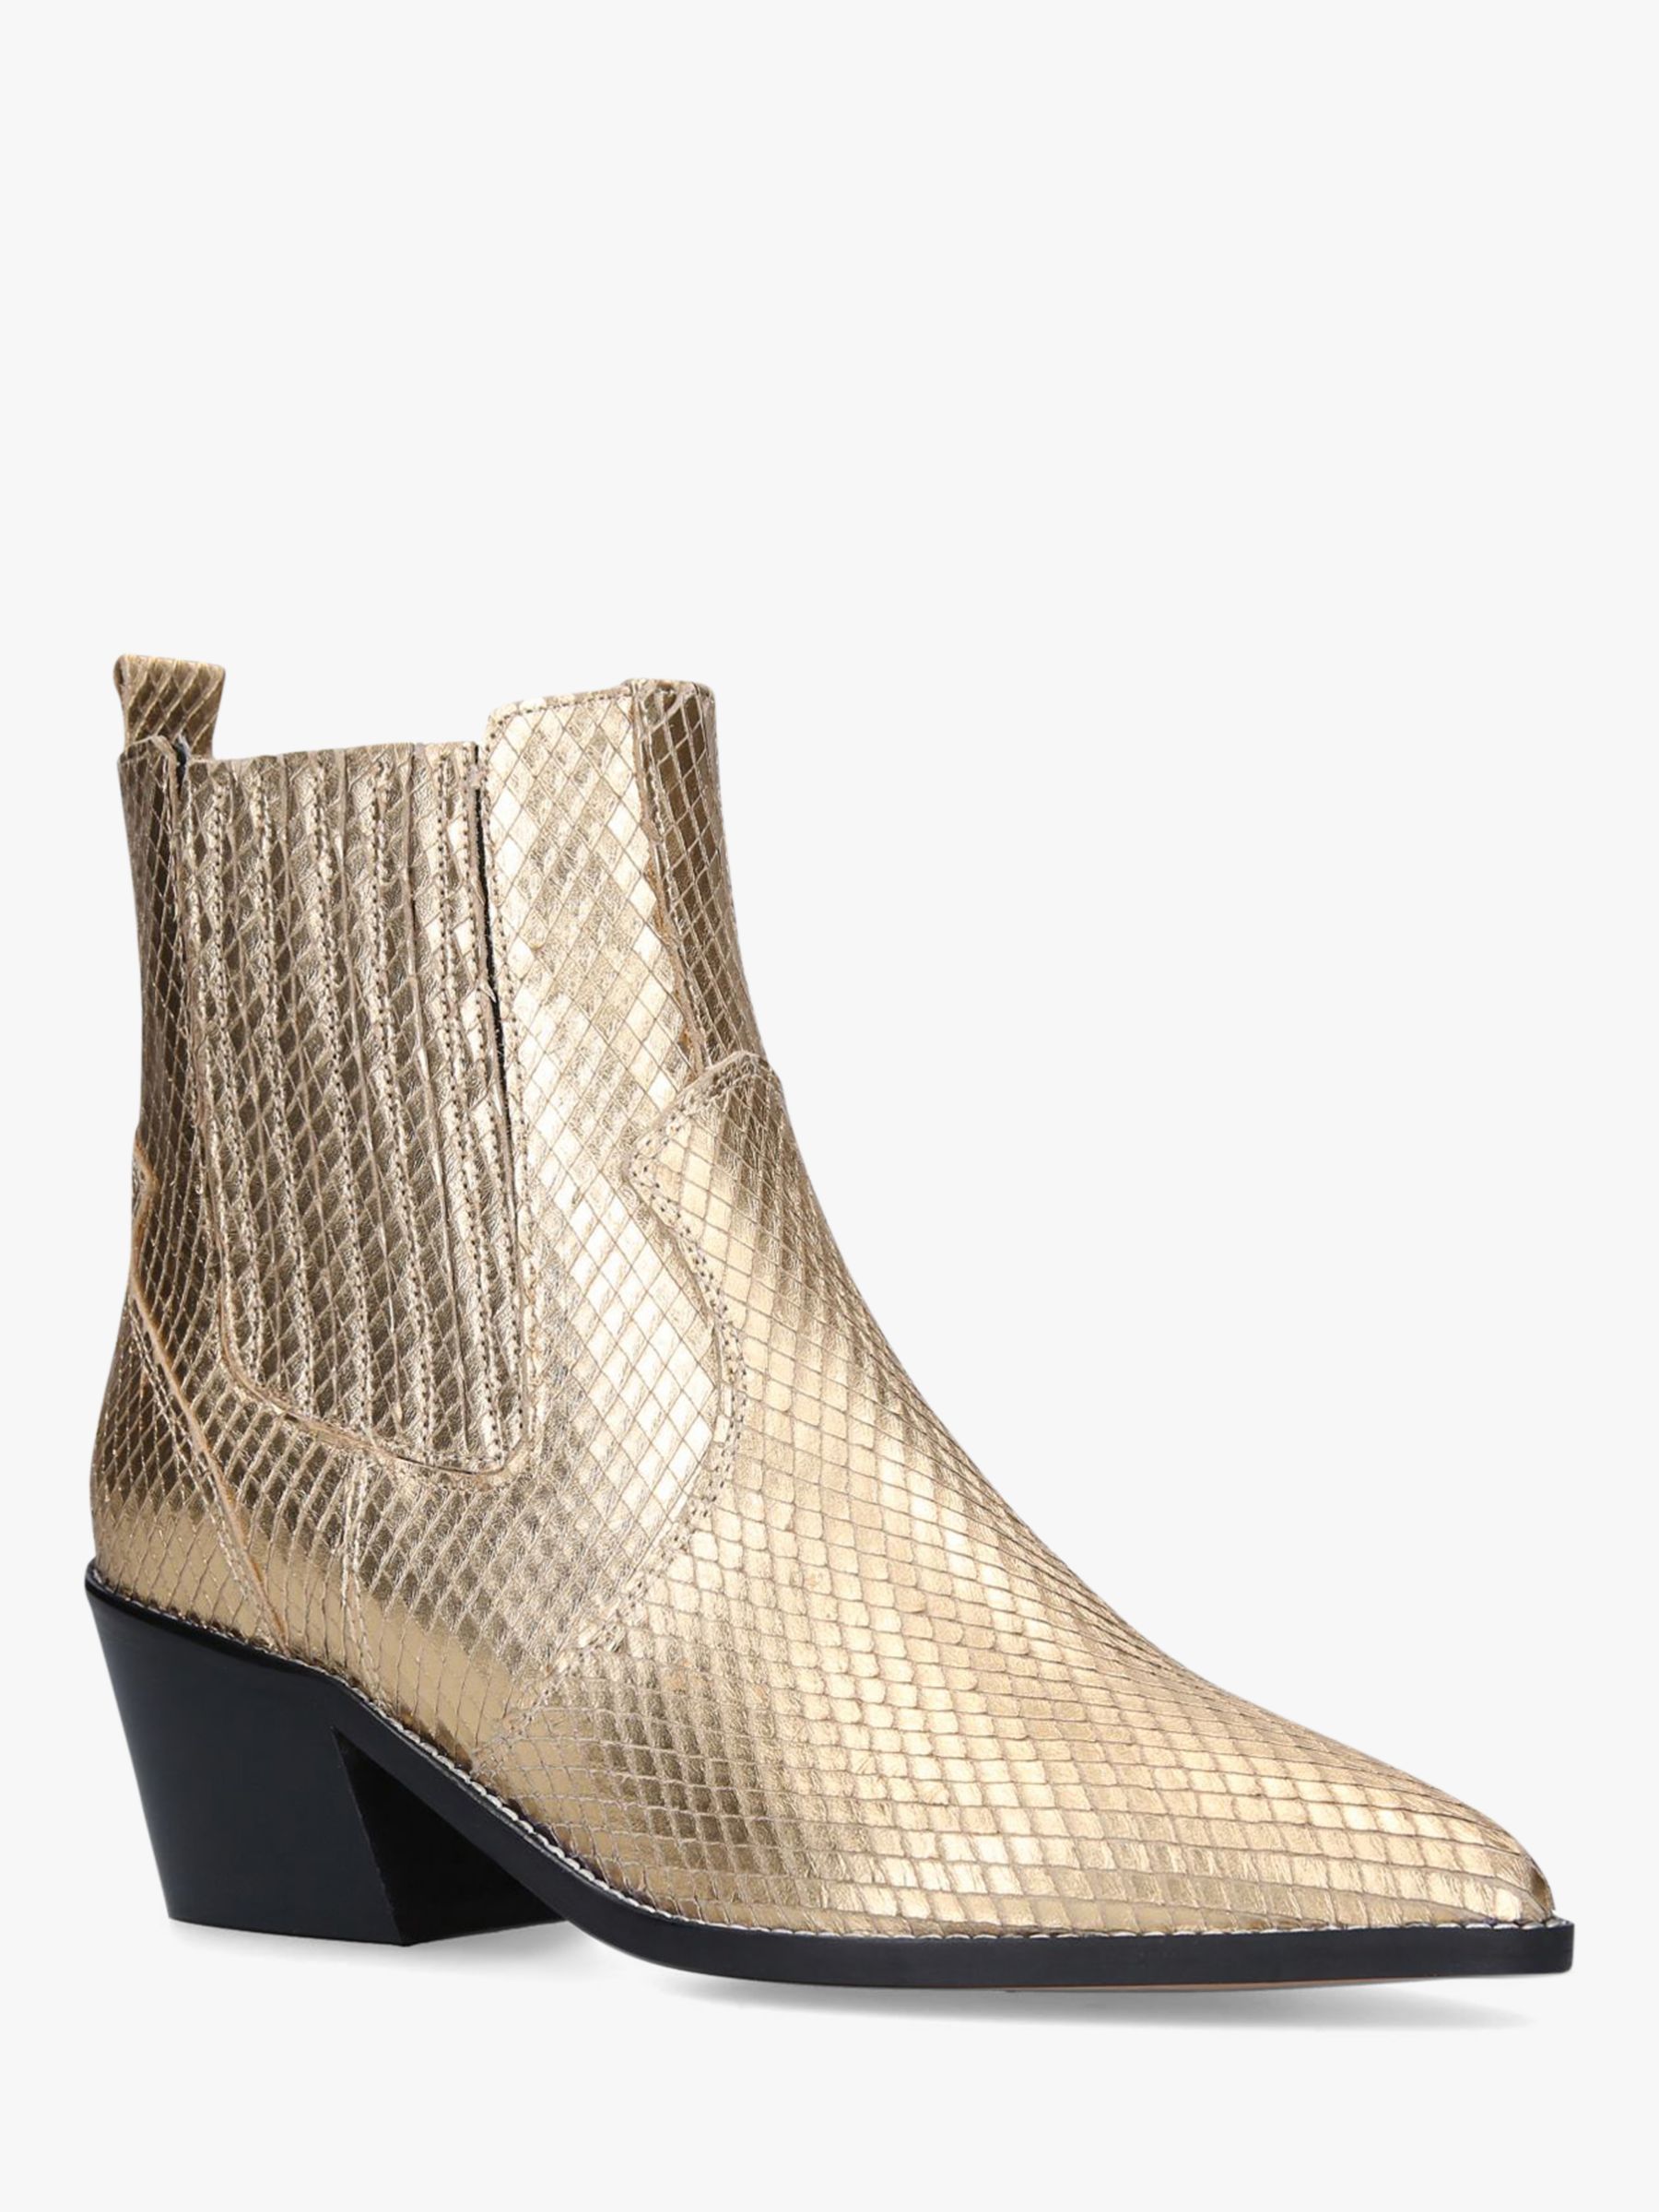 Carvela Stella Leather Western Style Ankle Boots, Gold at John Lewis ...